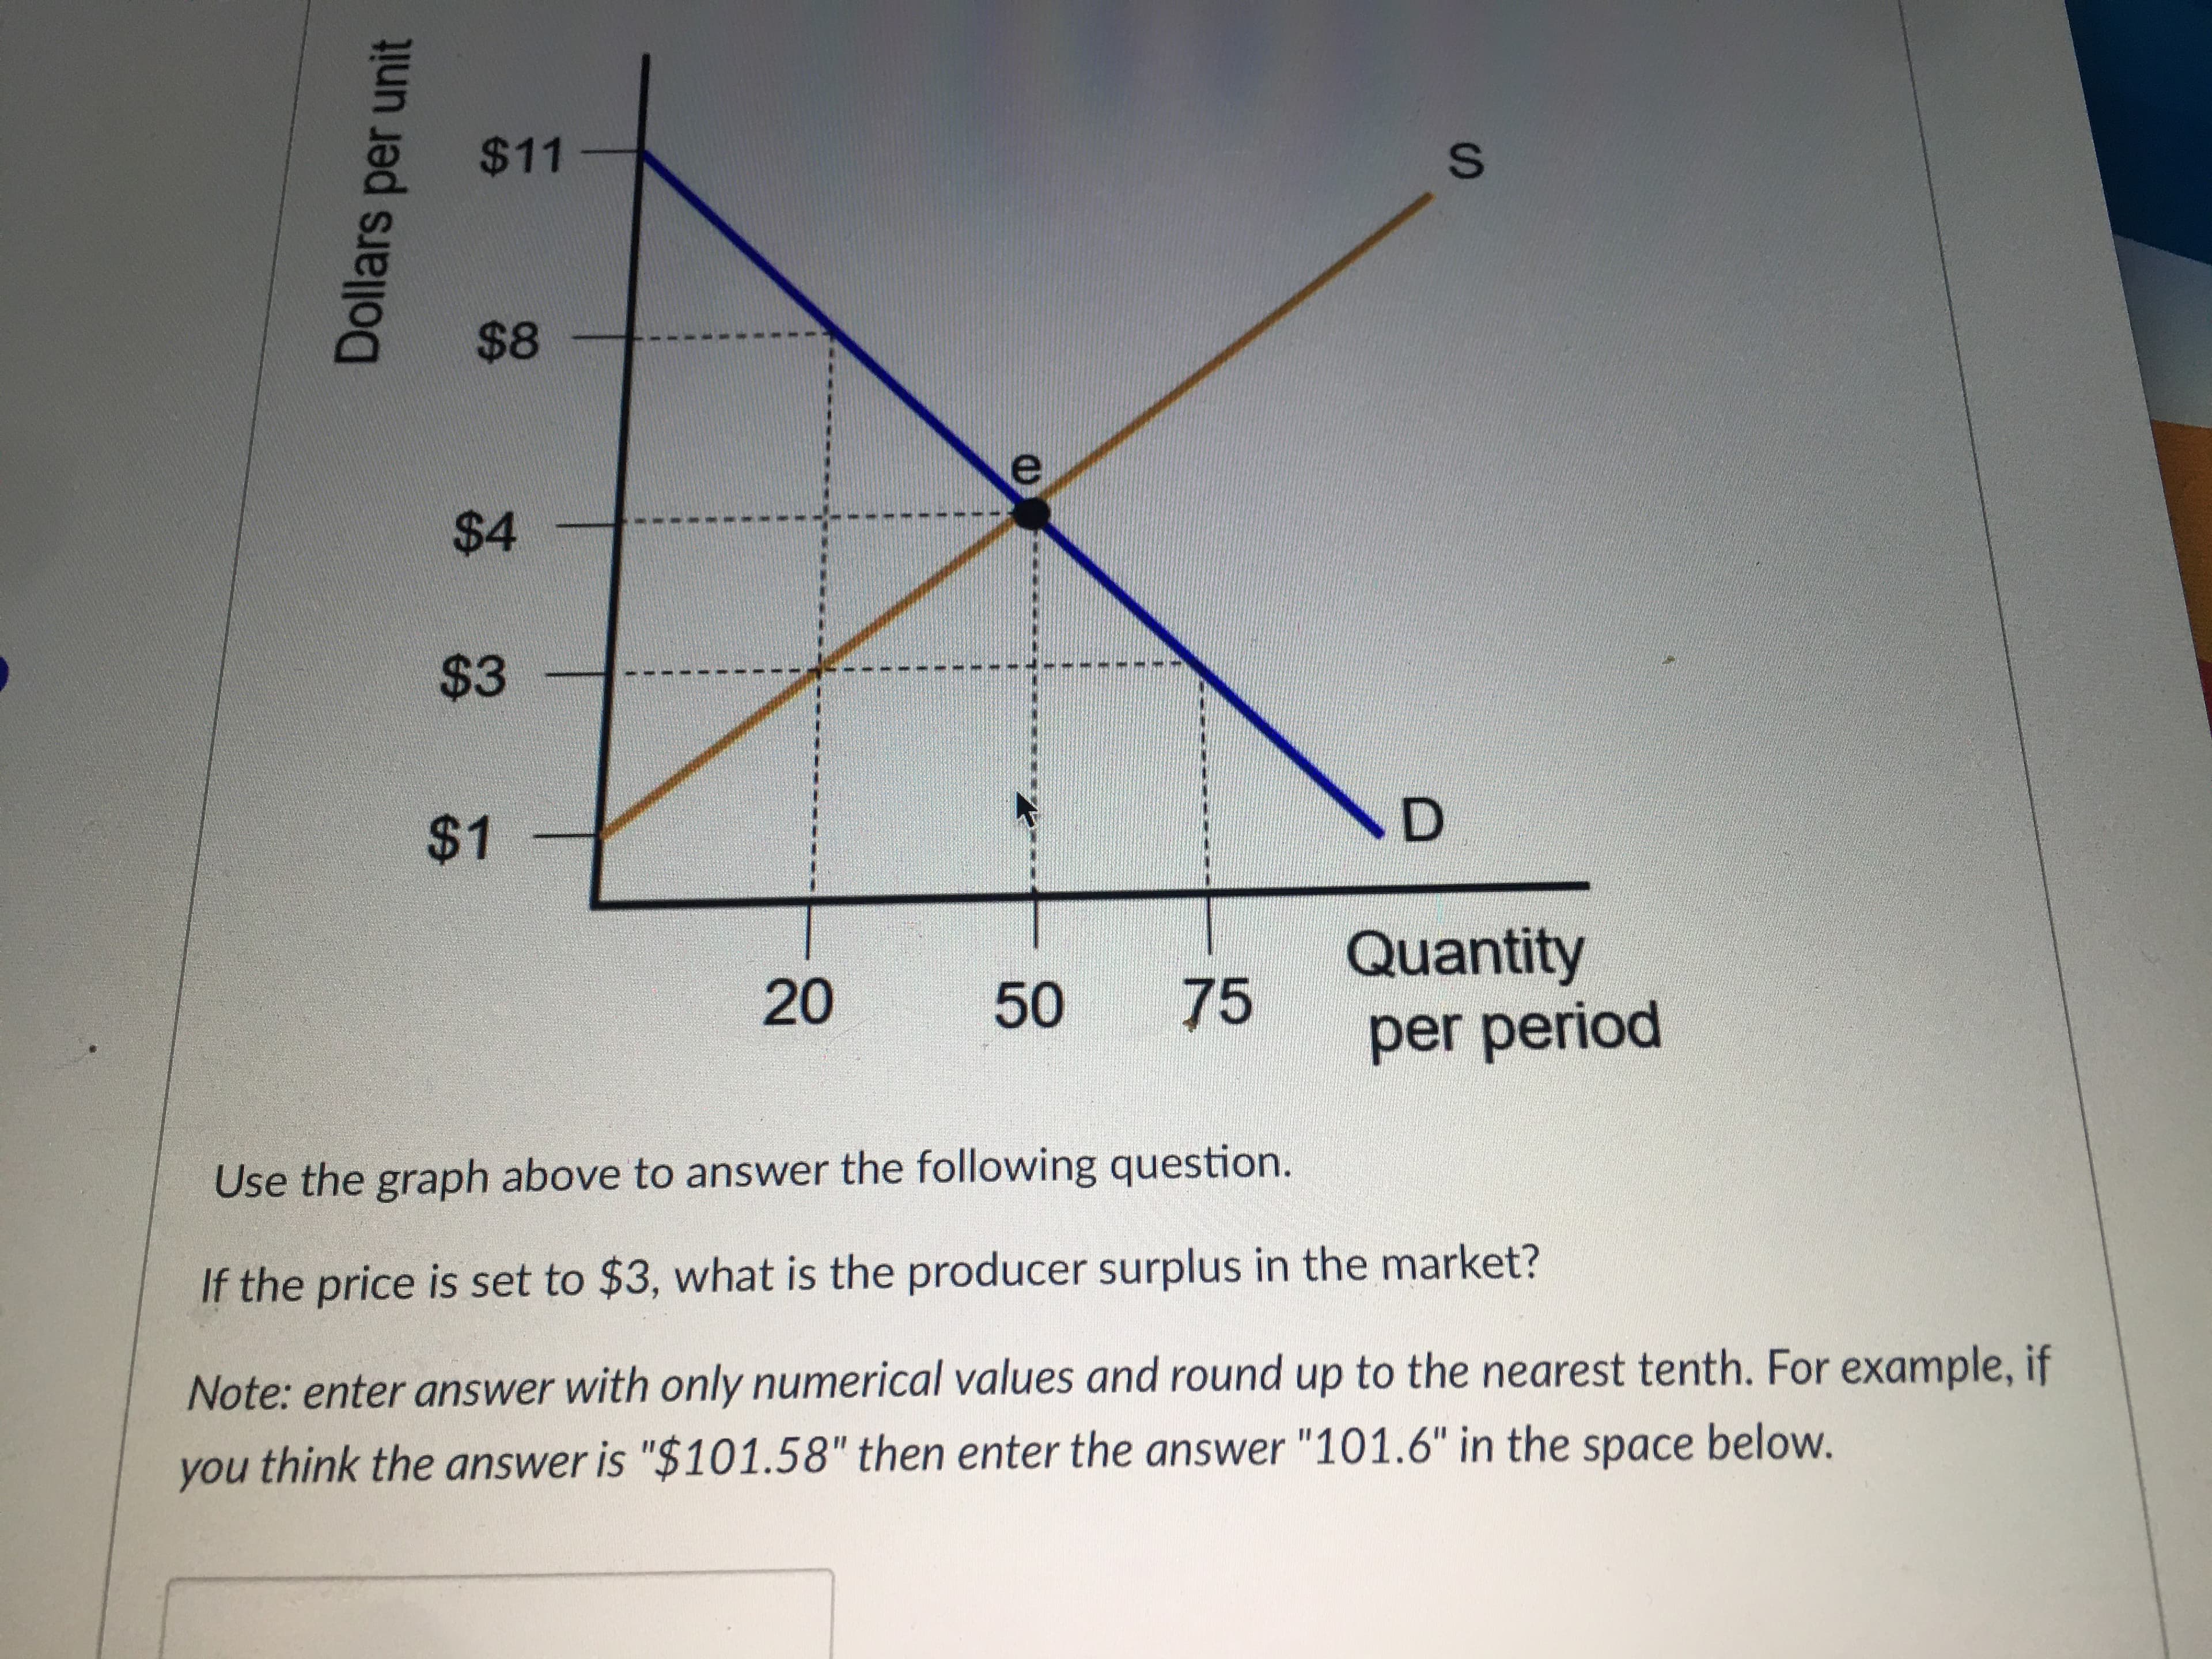 $11
$48
$4
$3
$1
D.
75
Quantity
per period
20
50
Use the graph above to answer the following question.
If the price is set to $3, what is the producer surplus in the market?
Note: enter answer with only numerical values and round up to the nearest tenth. For example, if
you think the answer is "$101.58" then enter the answer "101.6" in the space below.
Dollars
per unit
S.
